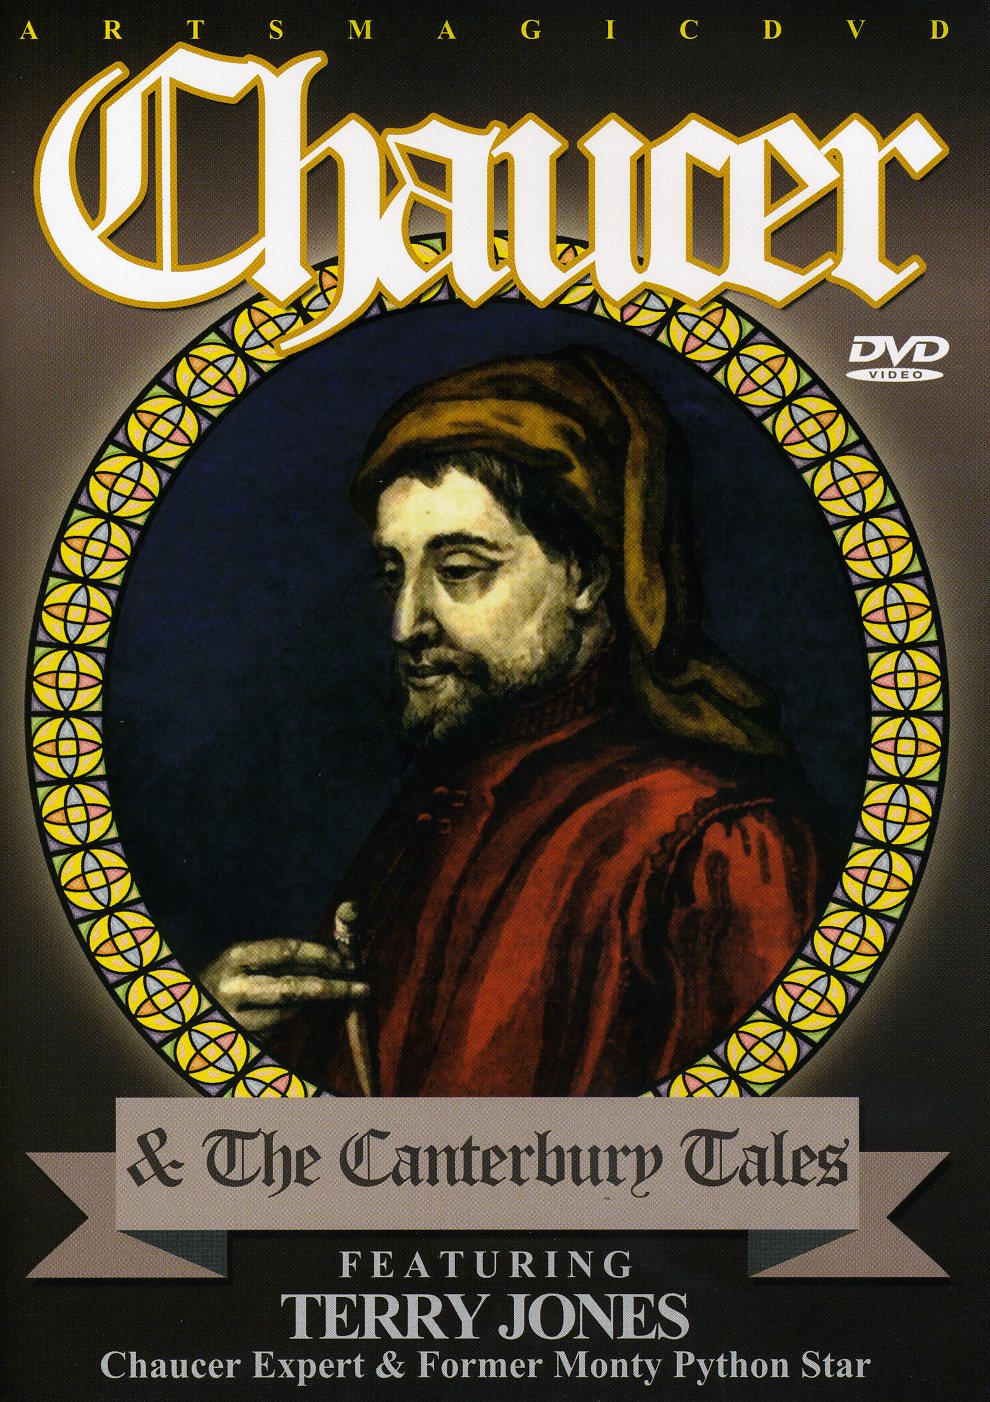 CHAUCER: ROAD TO CANTERBURY